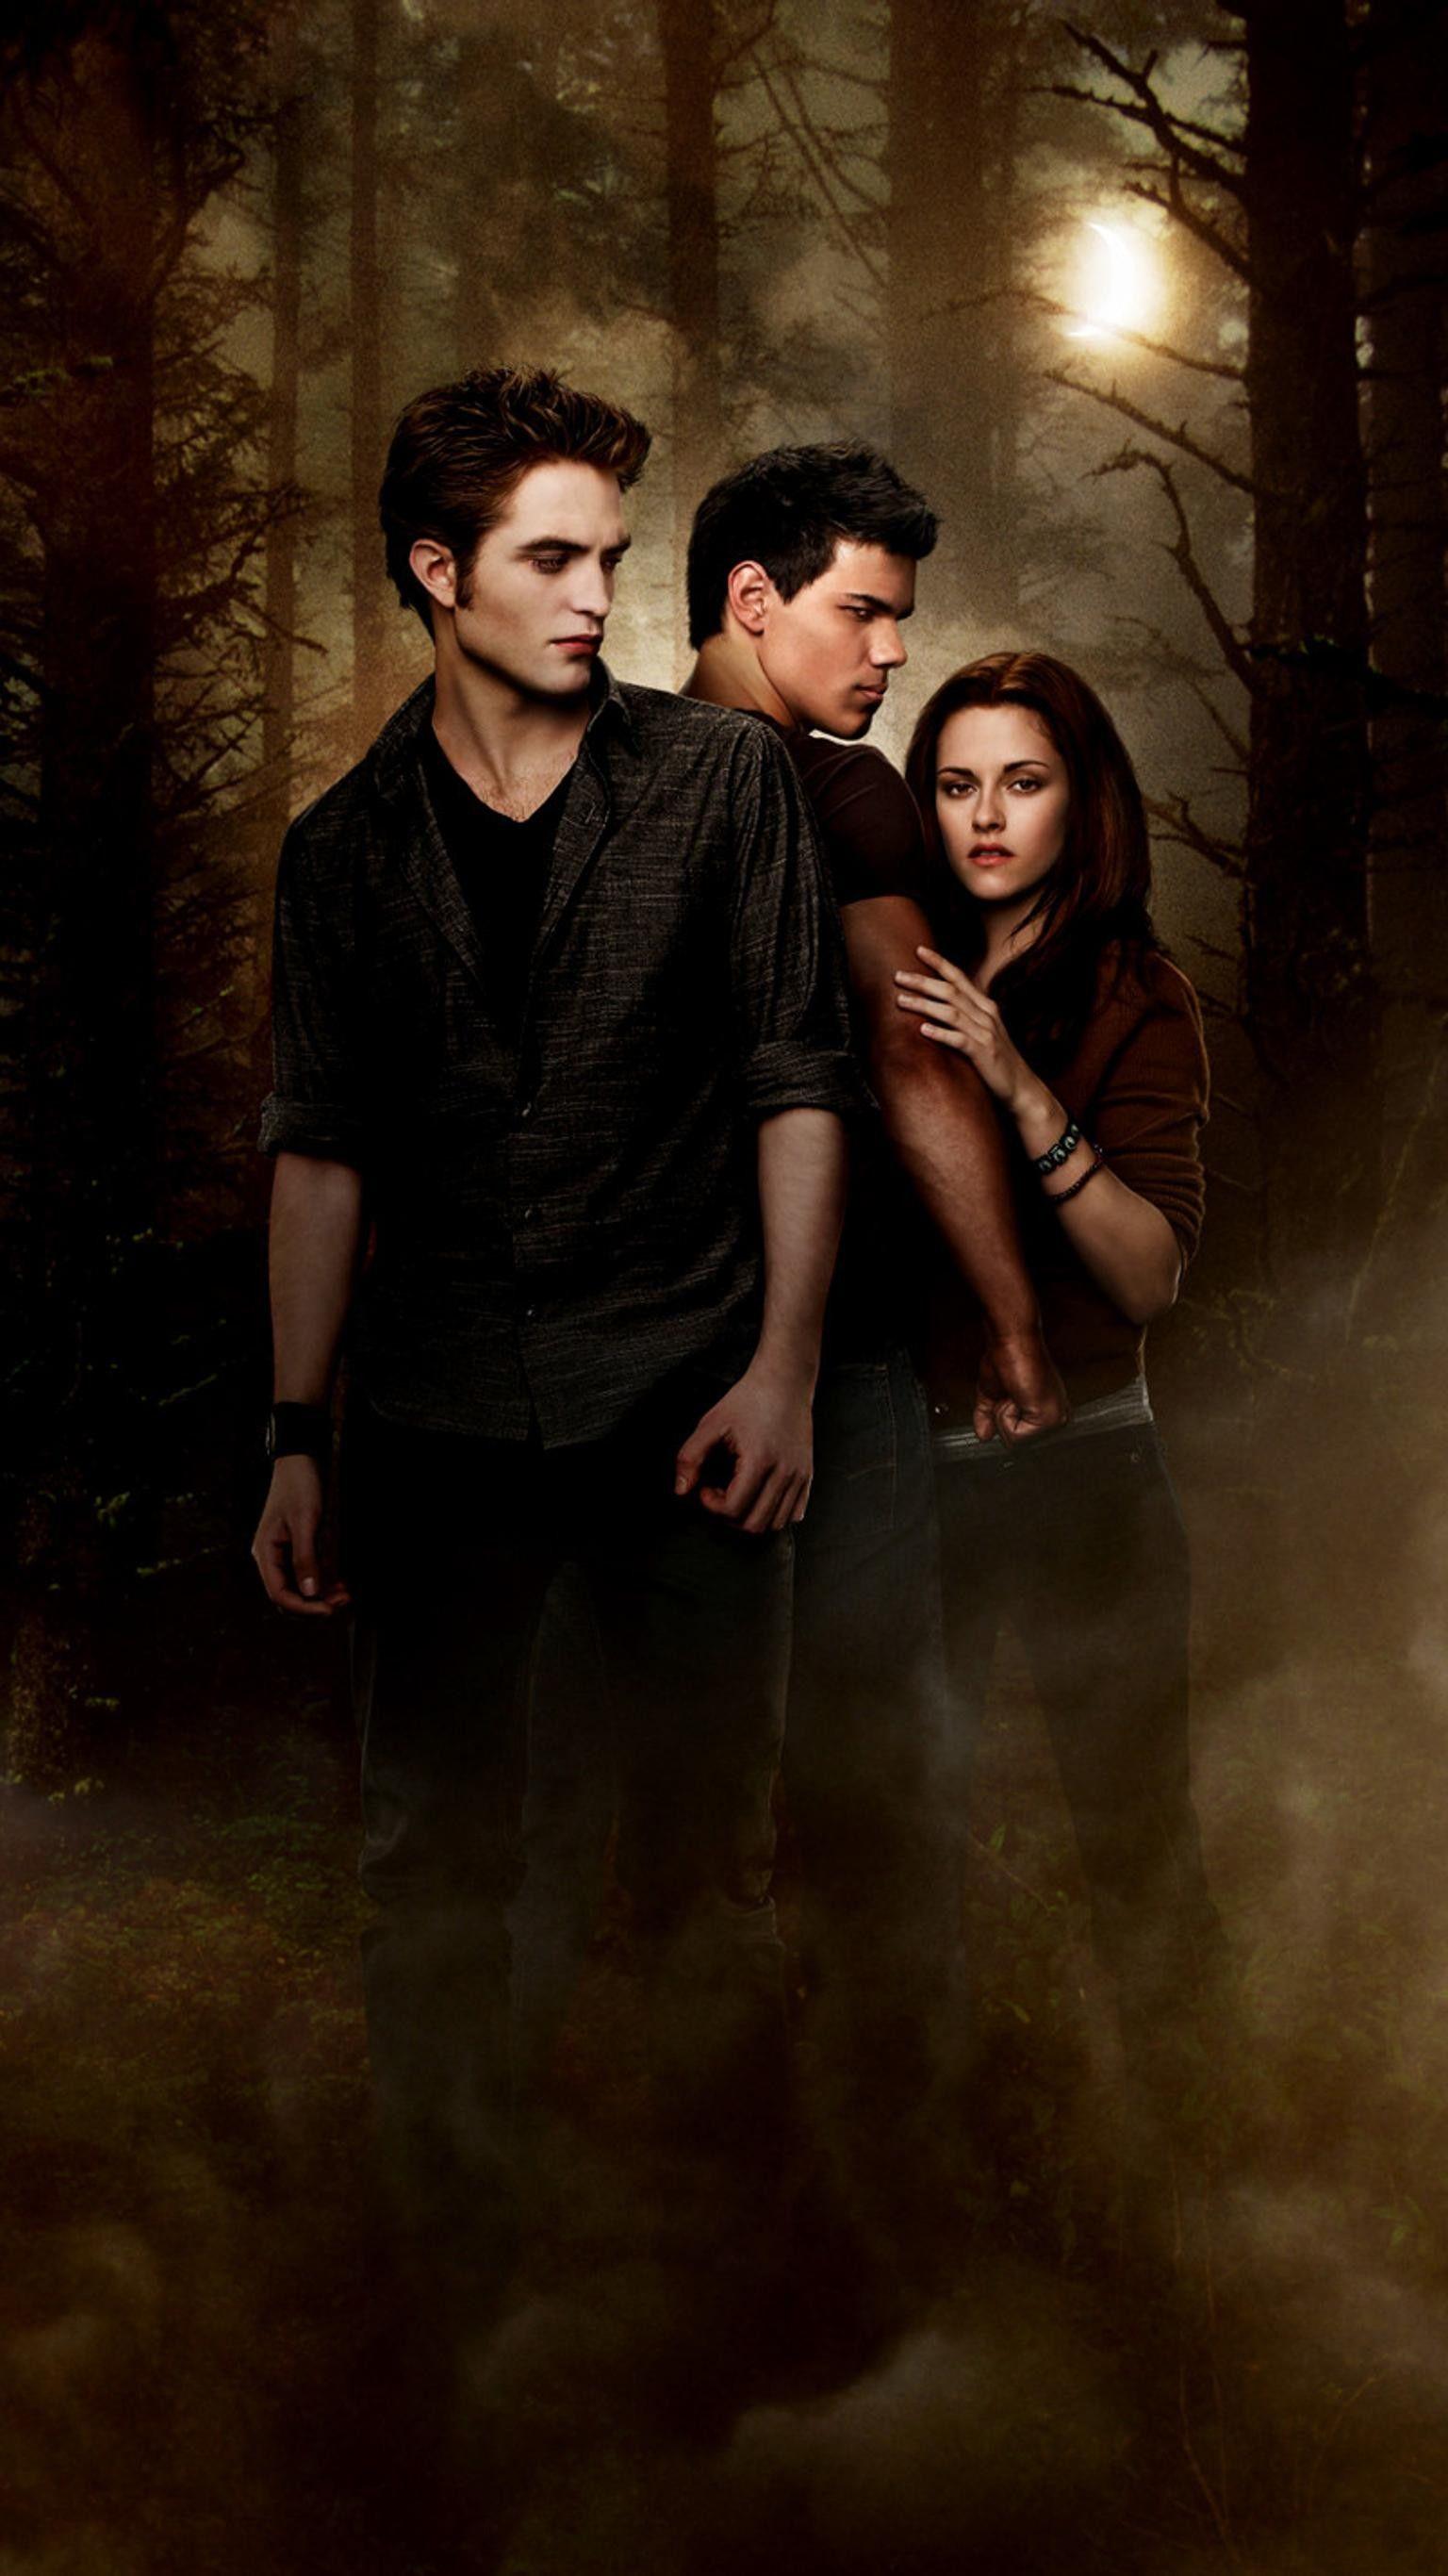 A poster of twilight characters in the woods - Twilight